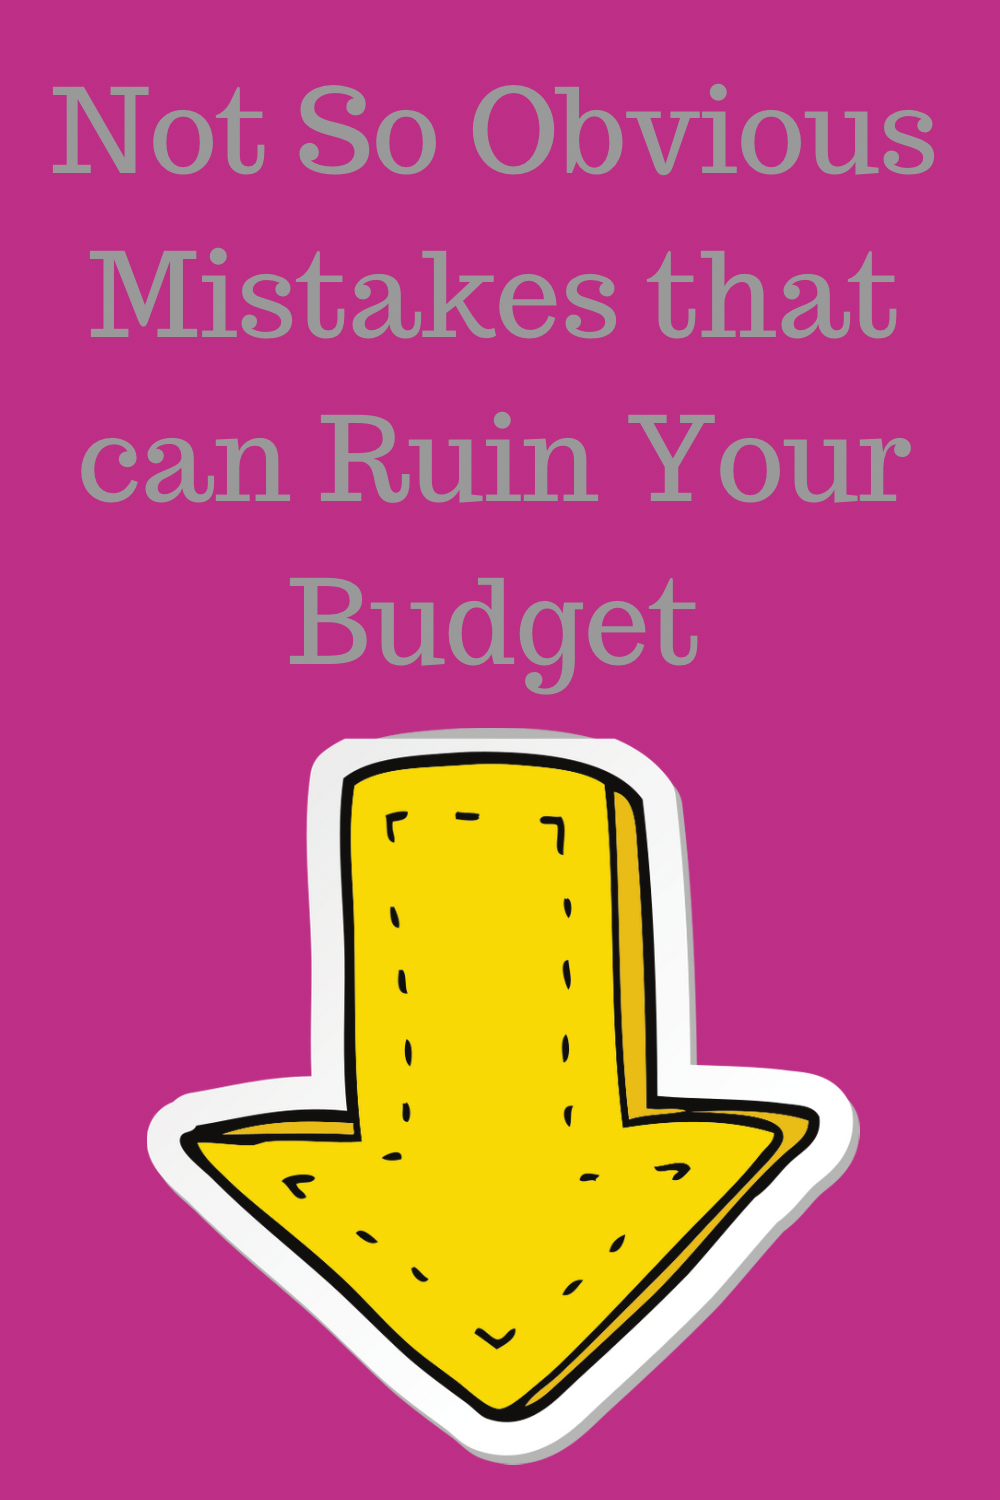 Not so obvious mistakes that can ruin your budget